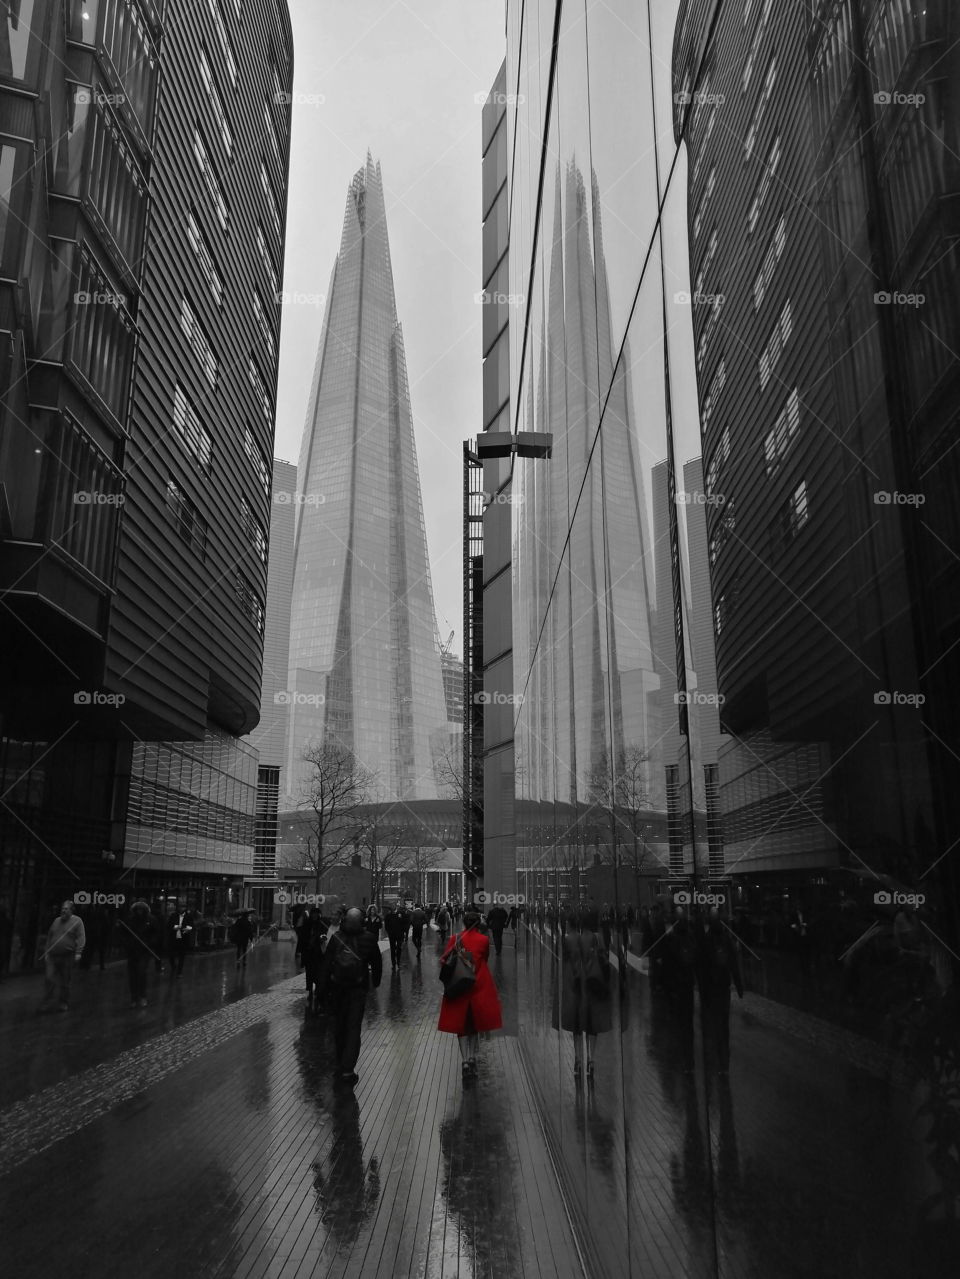 Wet London with the Shard and lady in red